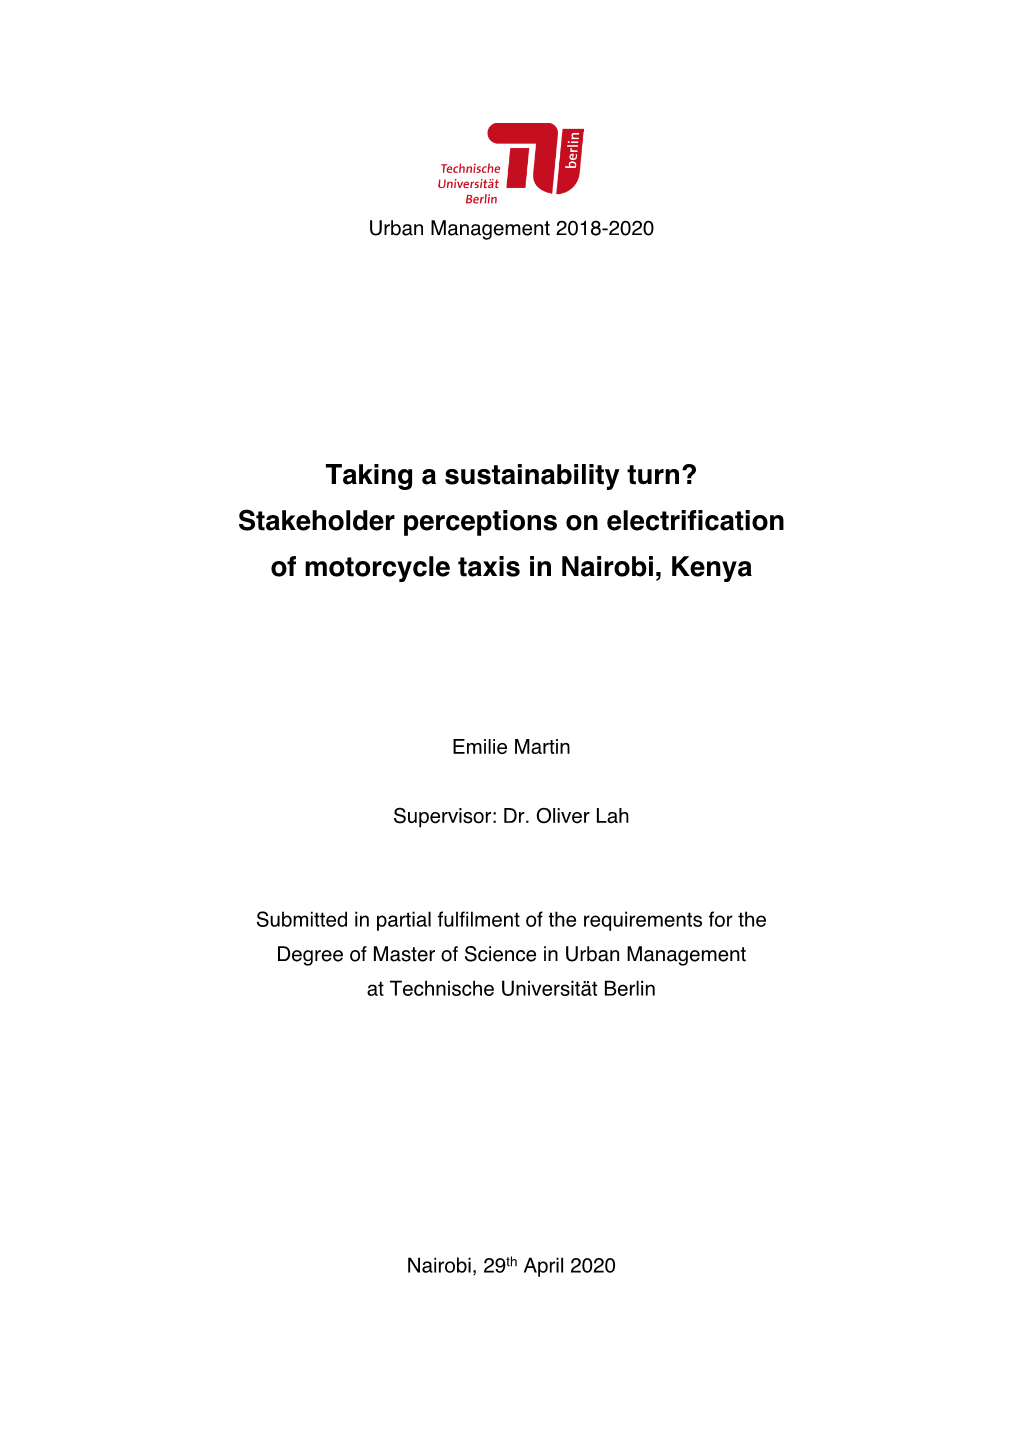 Stakeholder Perceptions on Electrification of Motorcycle Taxis in Nairobi, Kenya